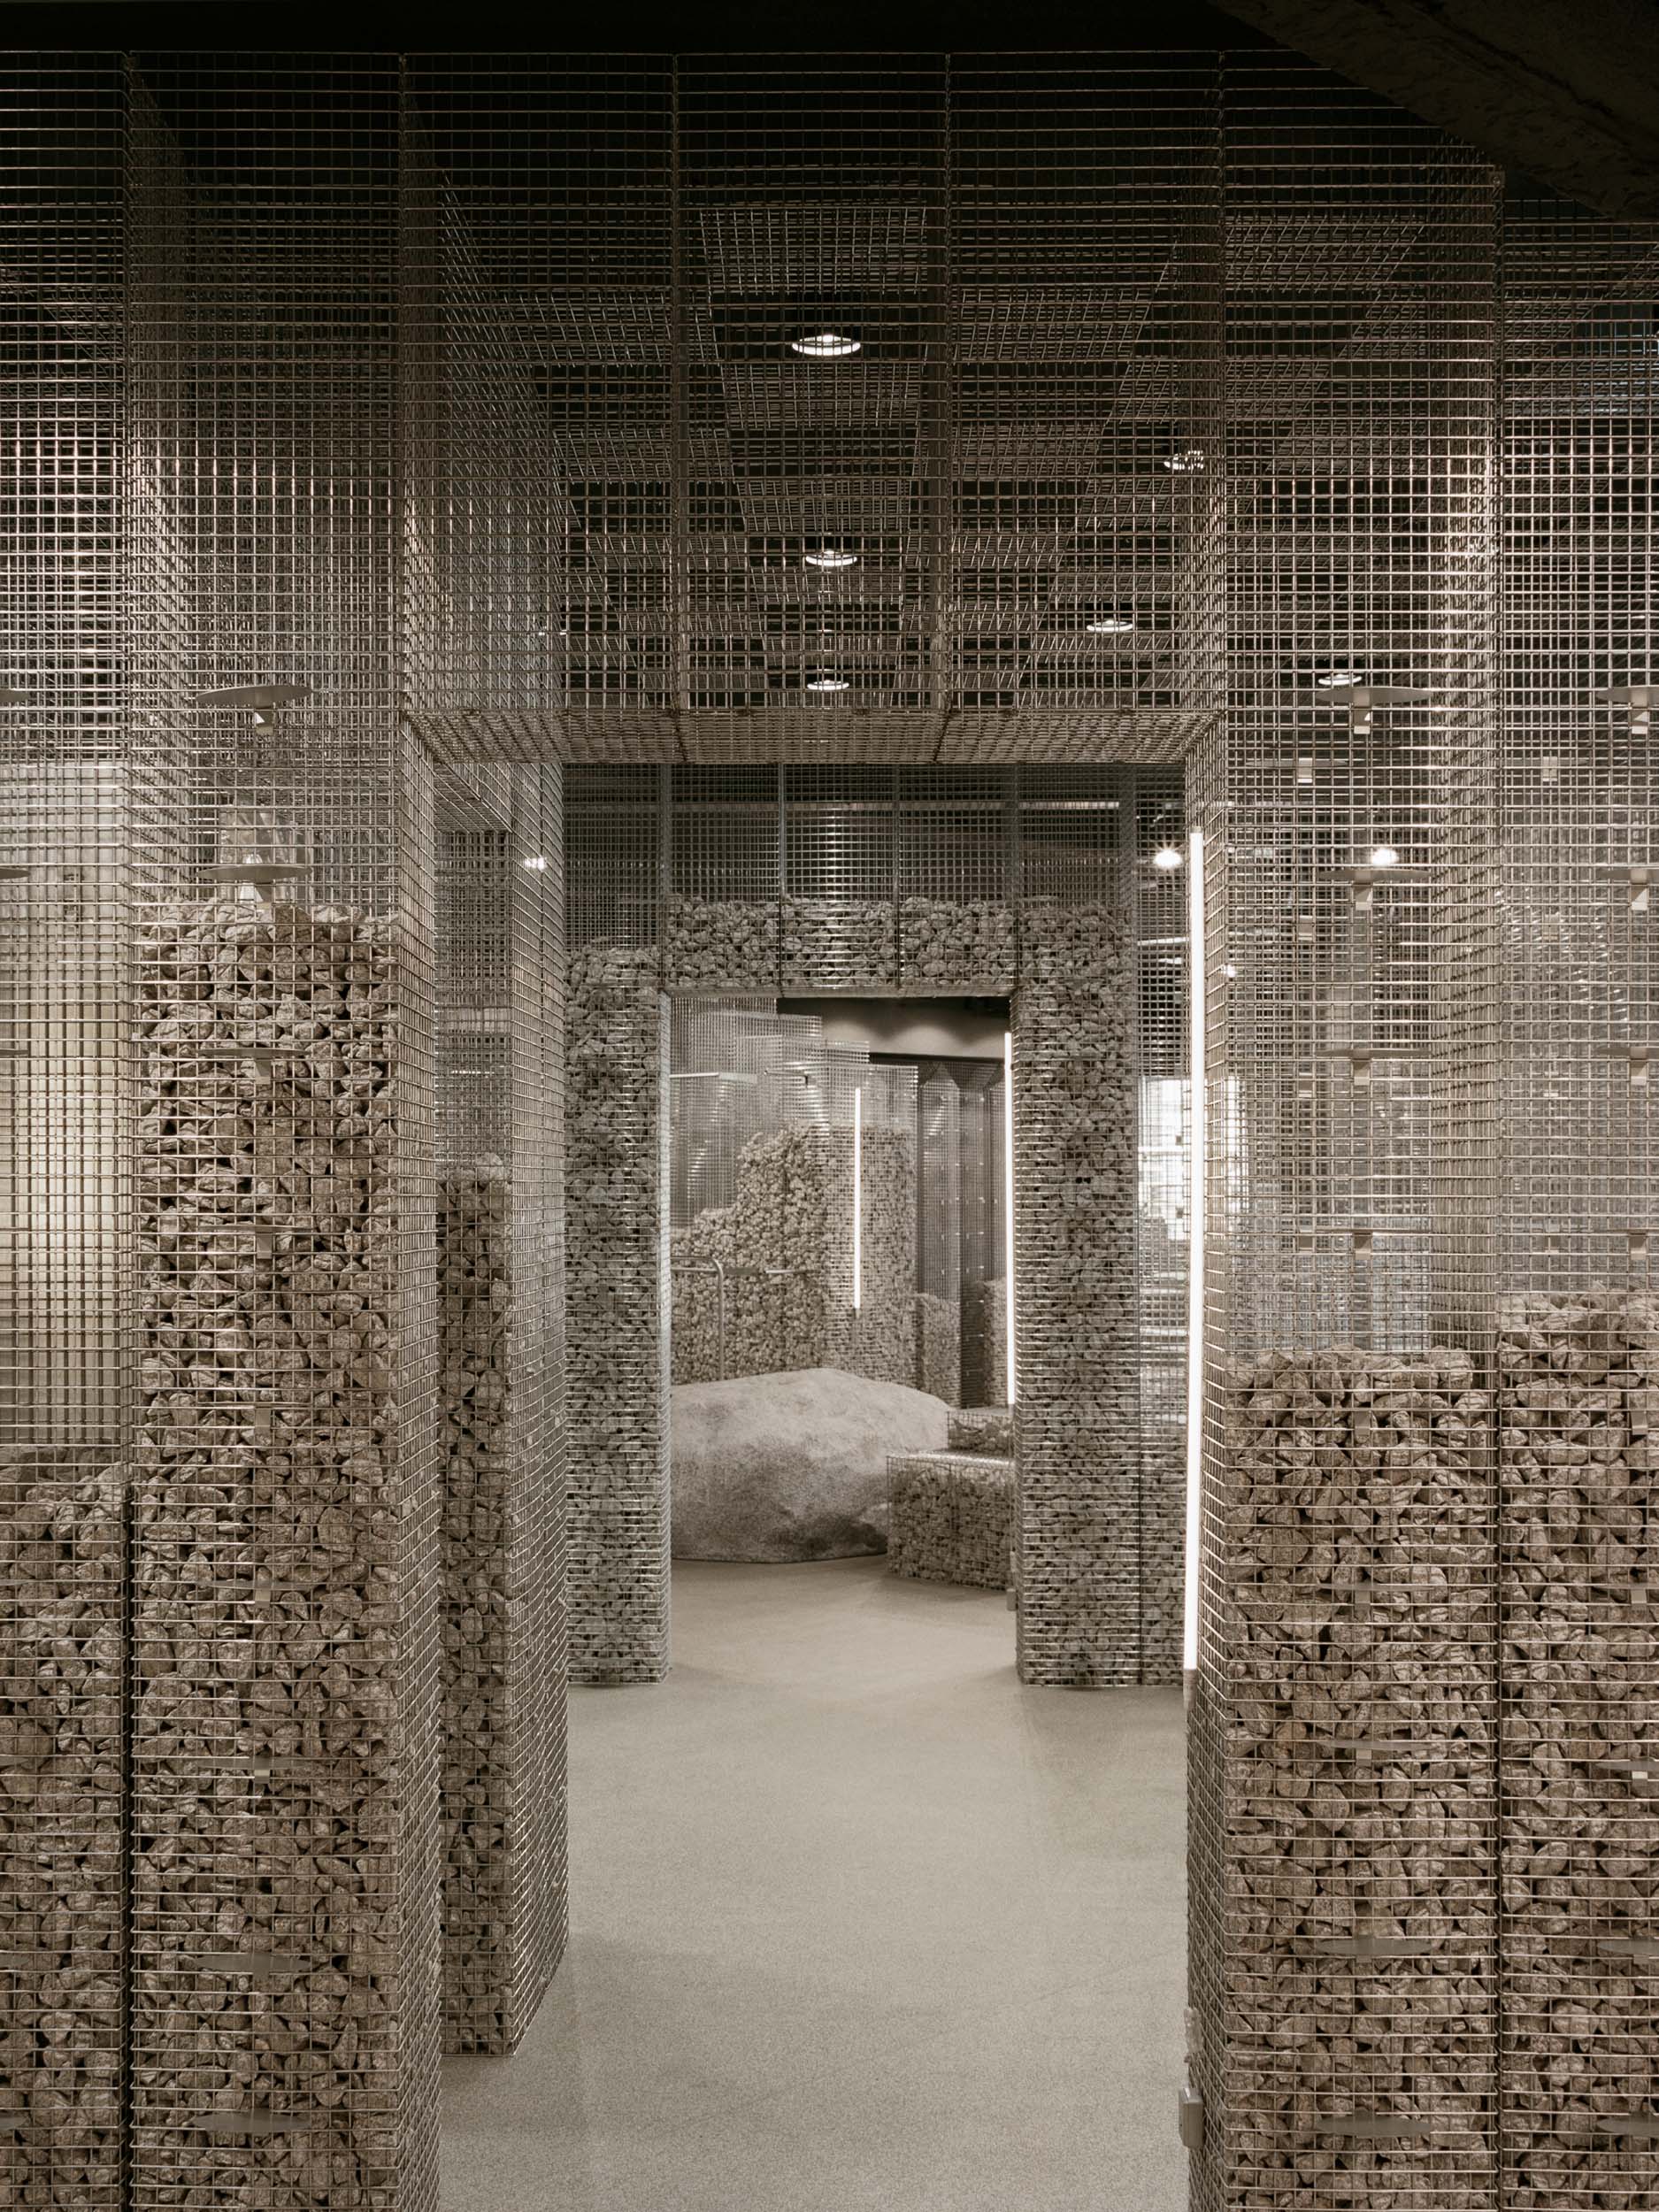 Structures of wire mesh create portals in a retail store in Portugal